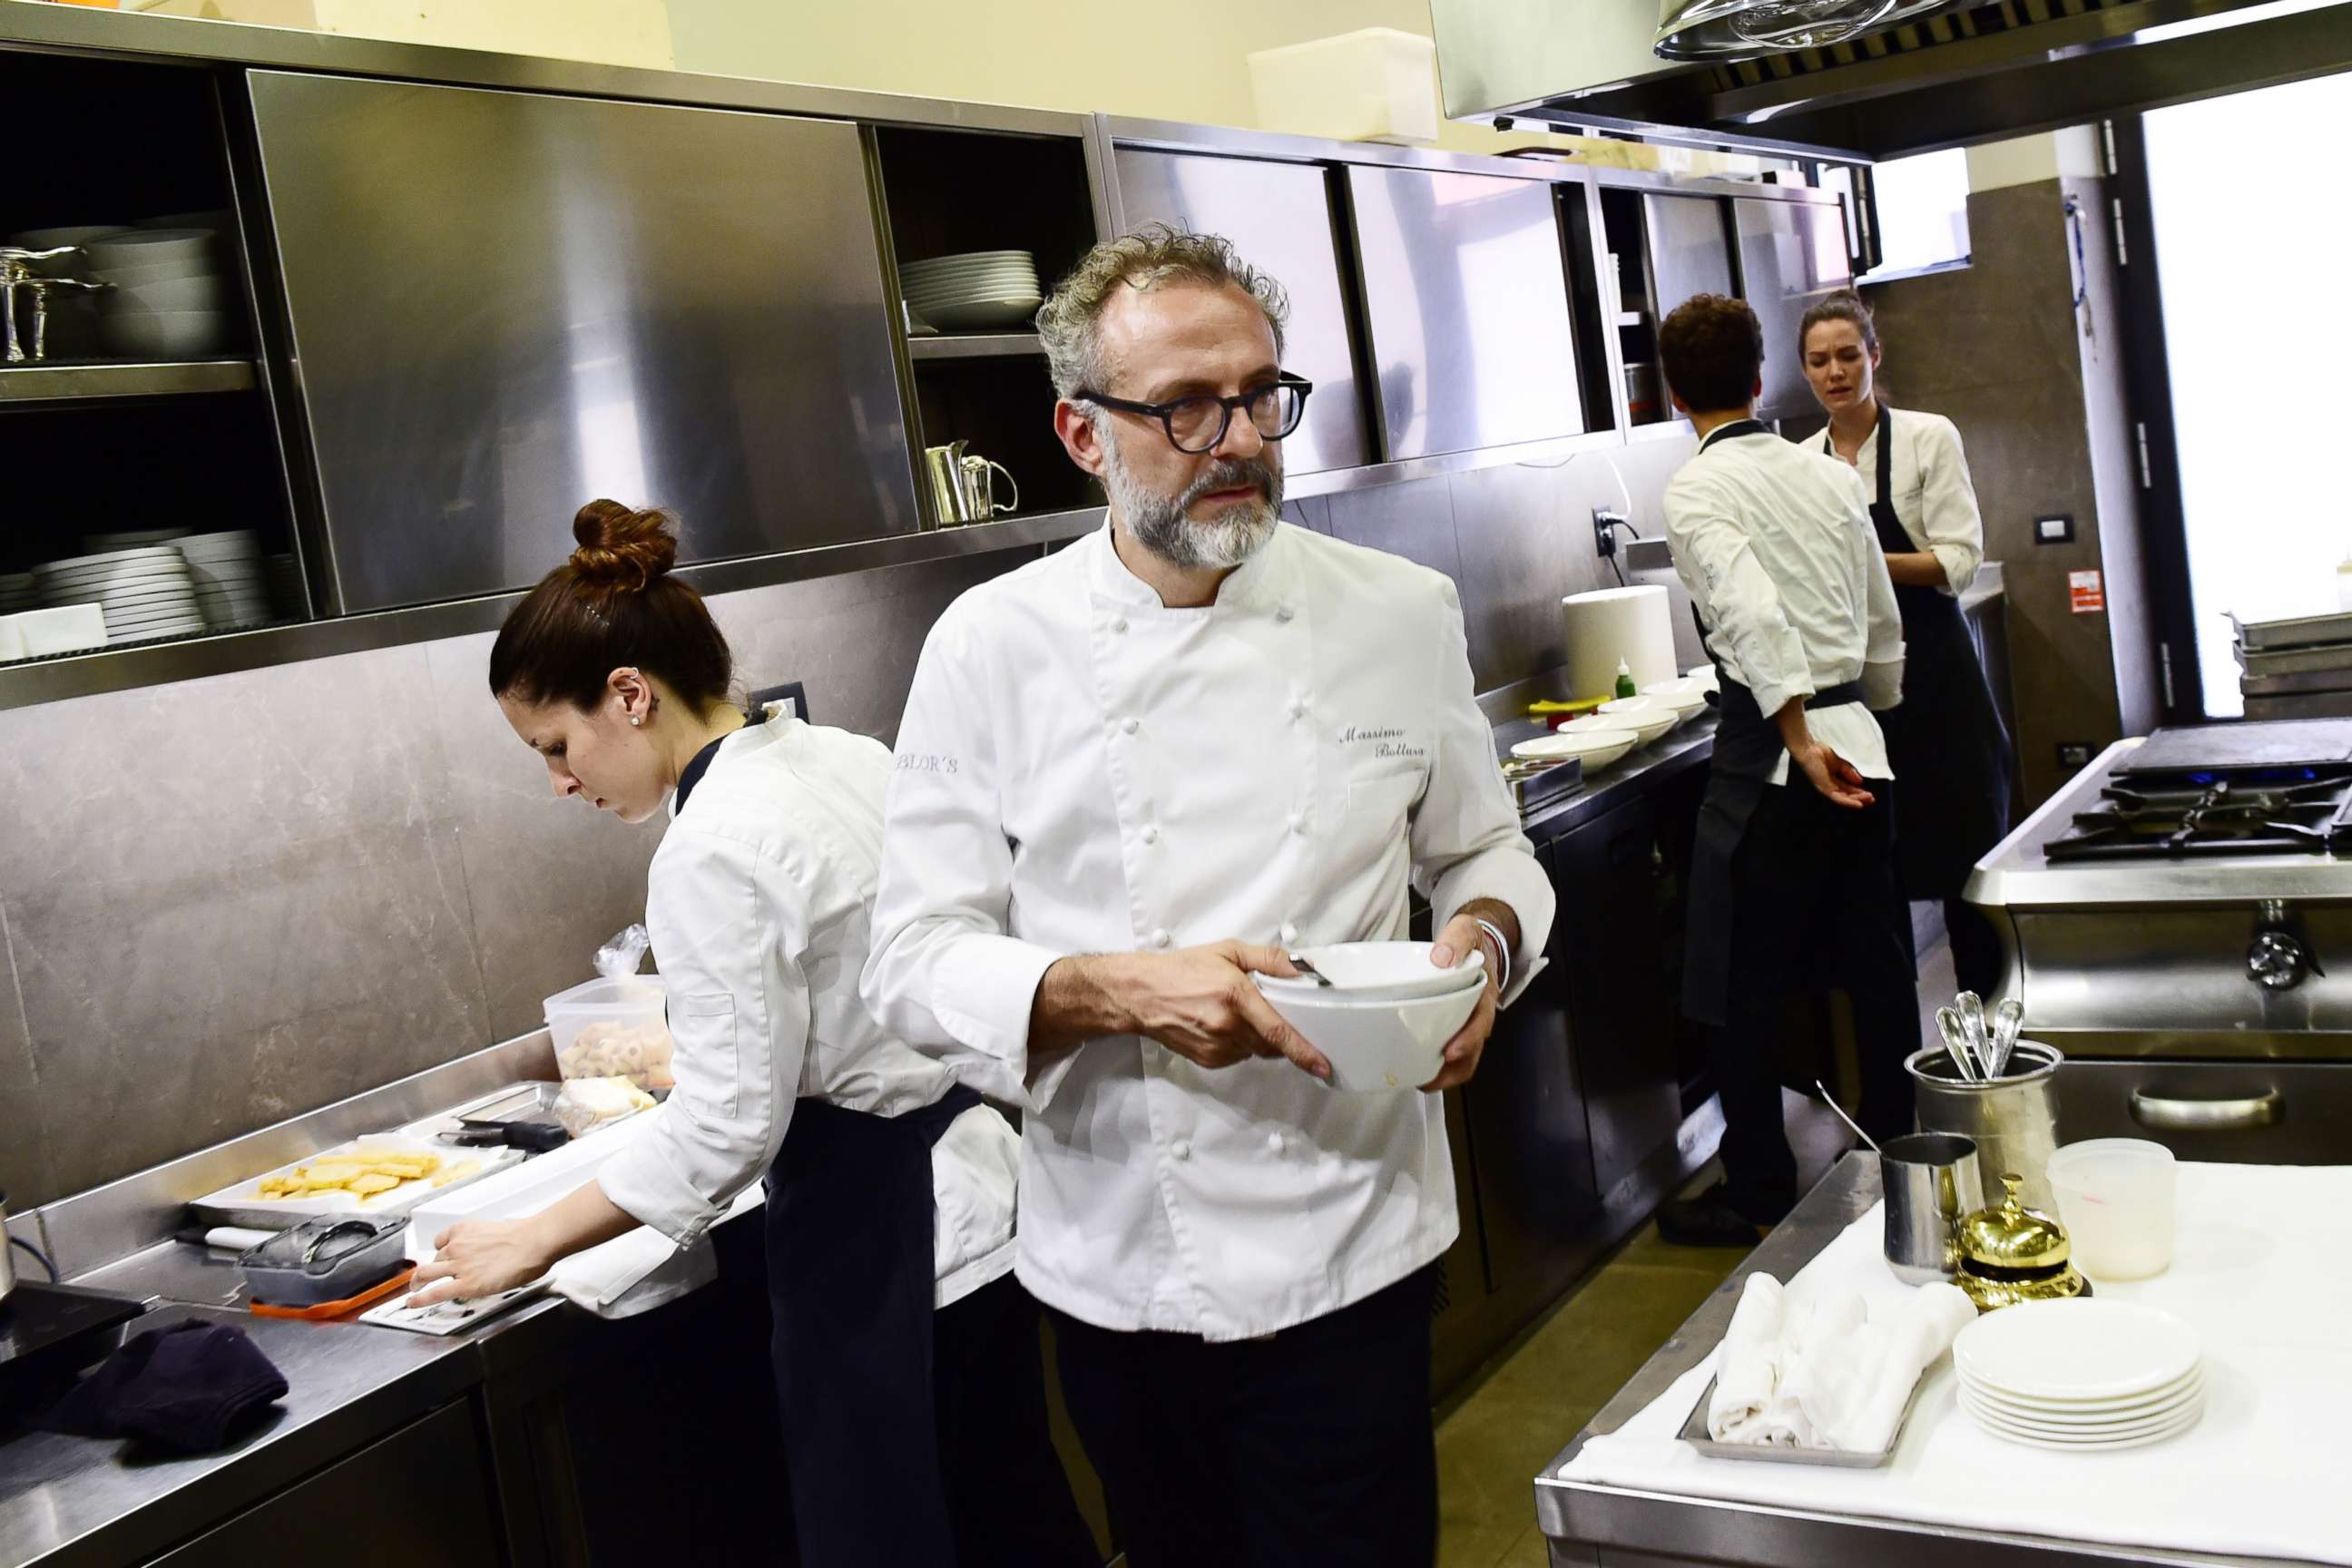 PHOTO: A picture taken on July 7, 2016 shows Italian chef Massimo Bottura working in the kitchen of his restaurant Osteria Francescana in Modena, Italy.